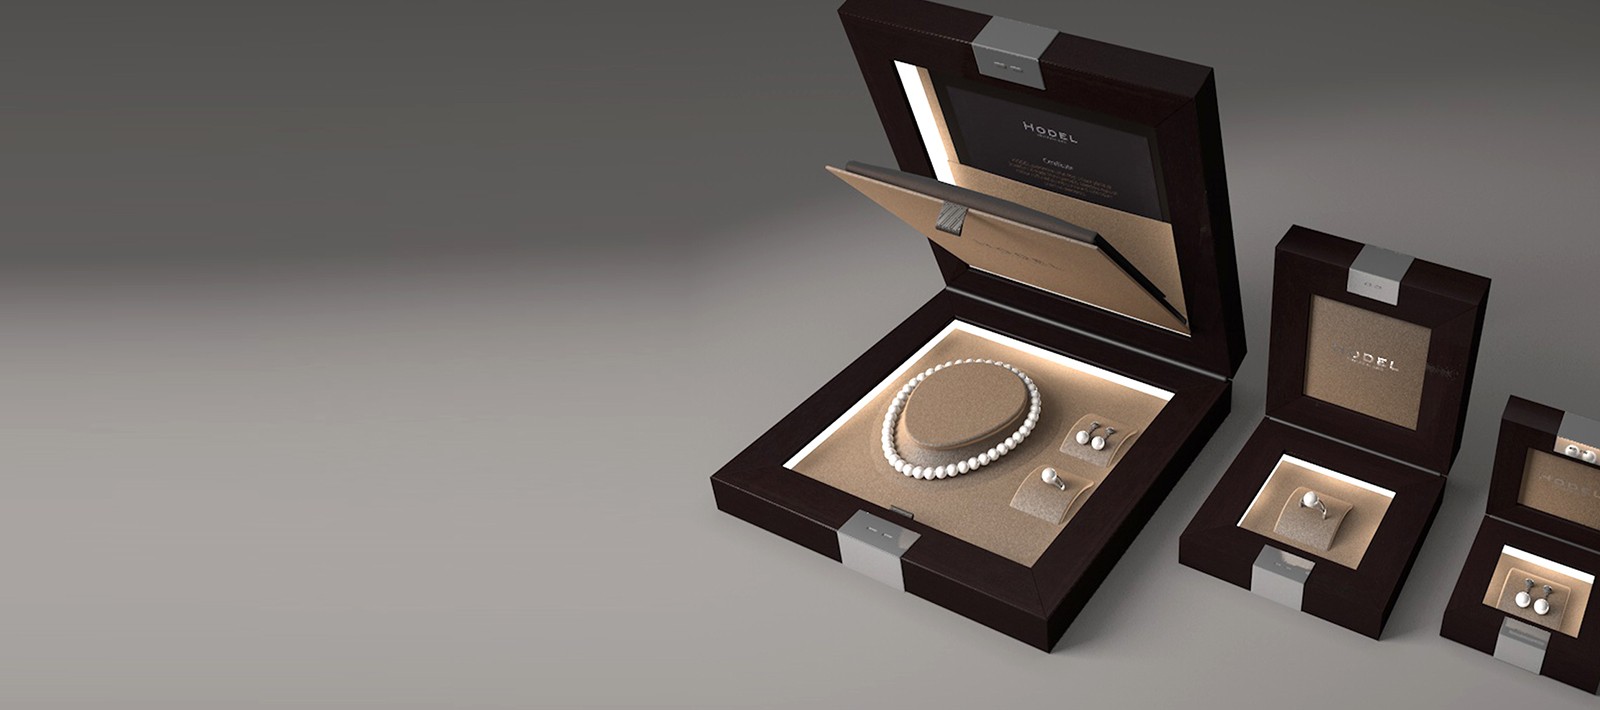 Luxury Packaging Design for a jewelry company